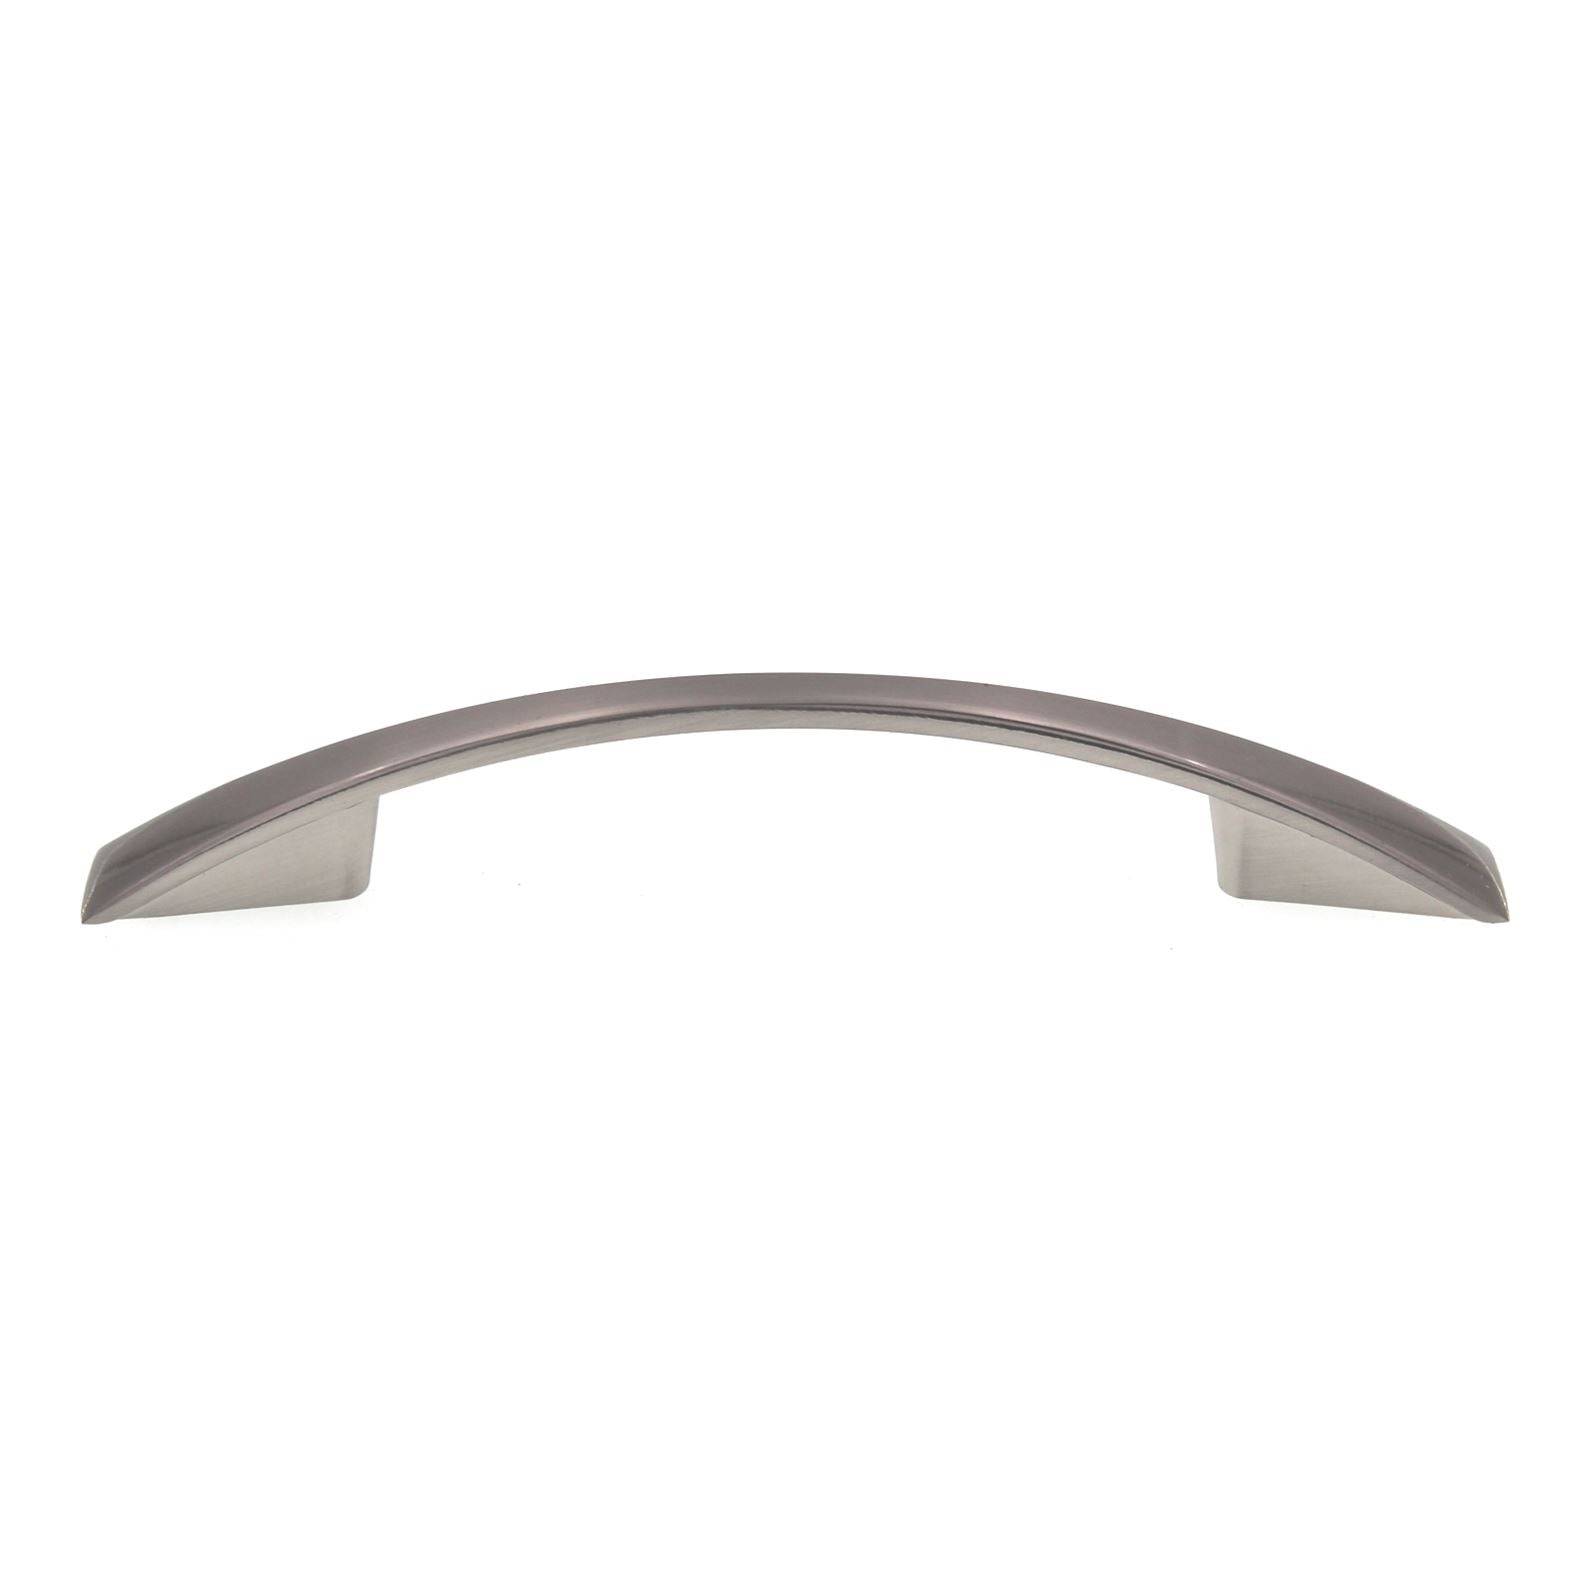 Pride Modern Bow Cabinet Arch Pull 3 3/4" (96mm) Ctr Satin Nickel P82103-SN